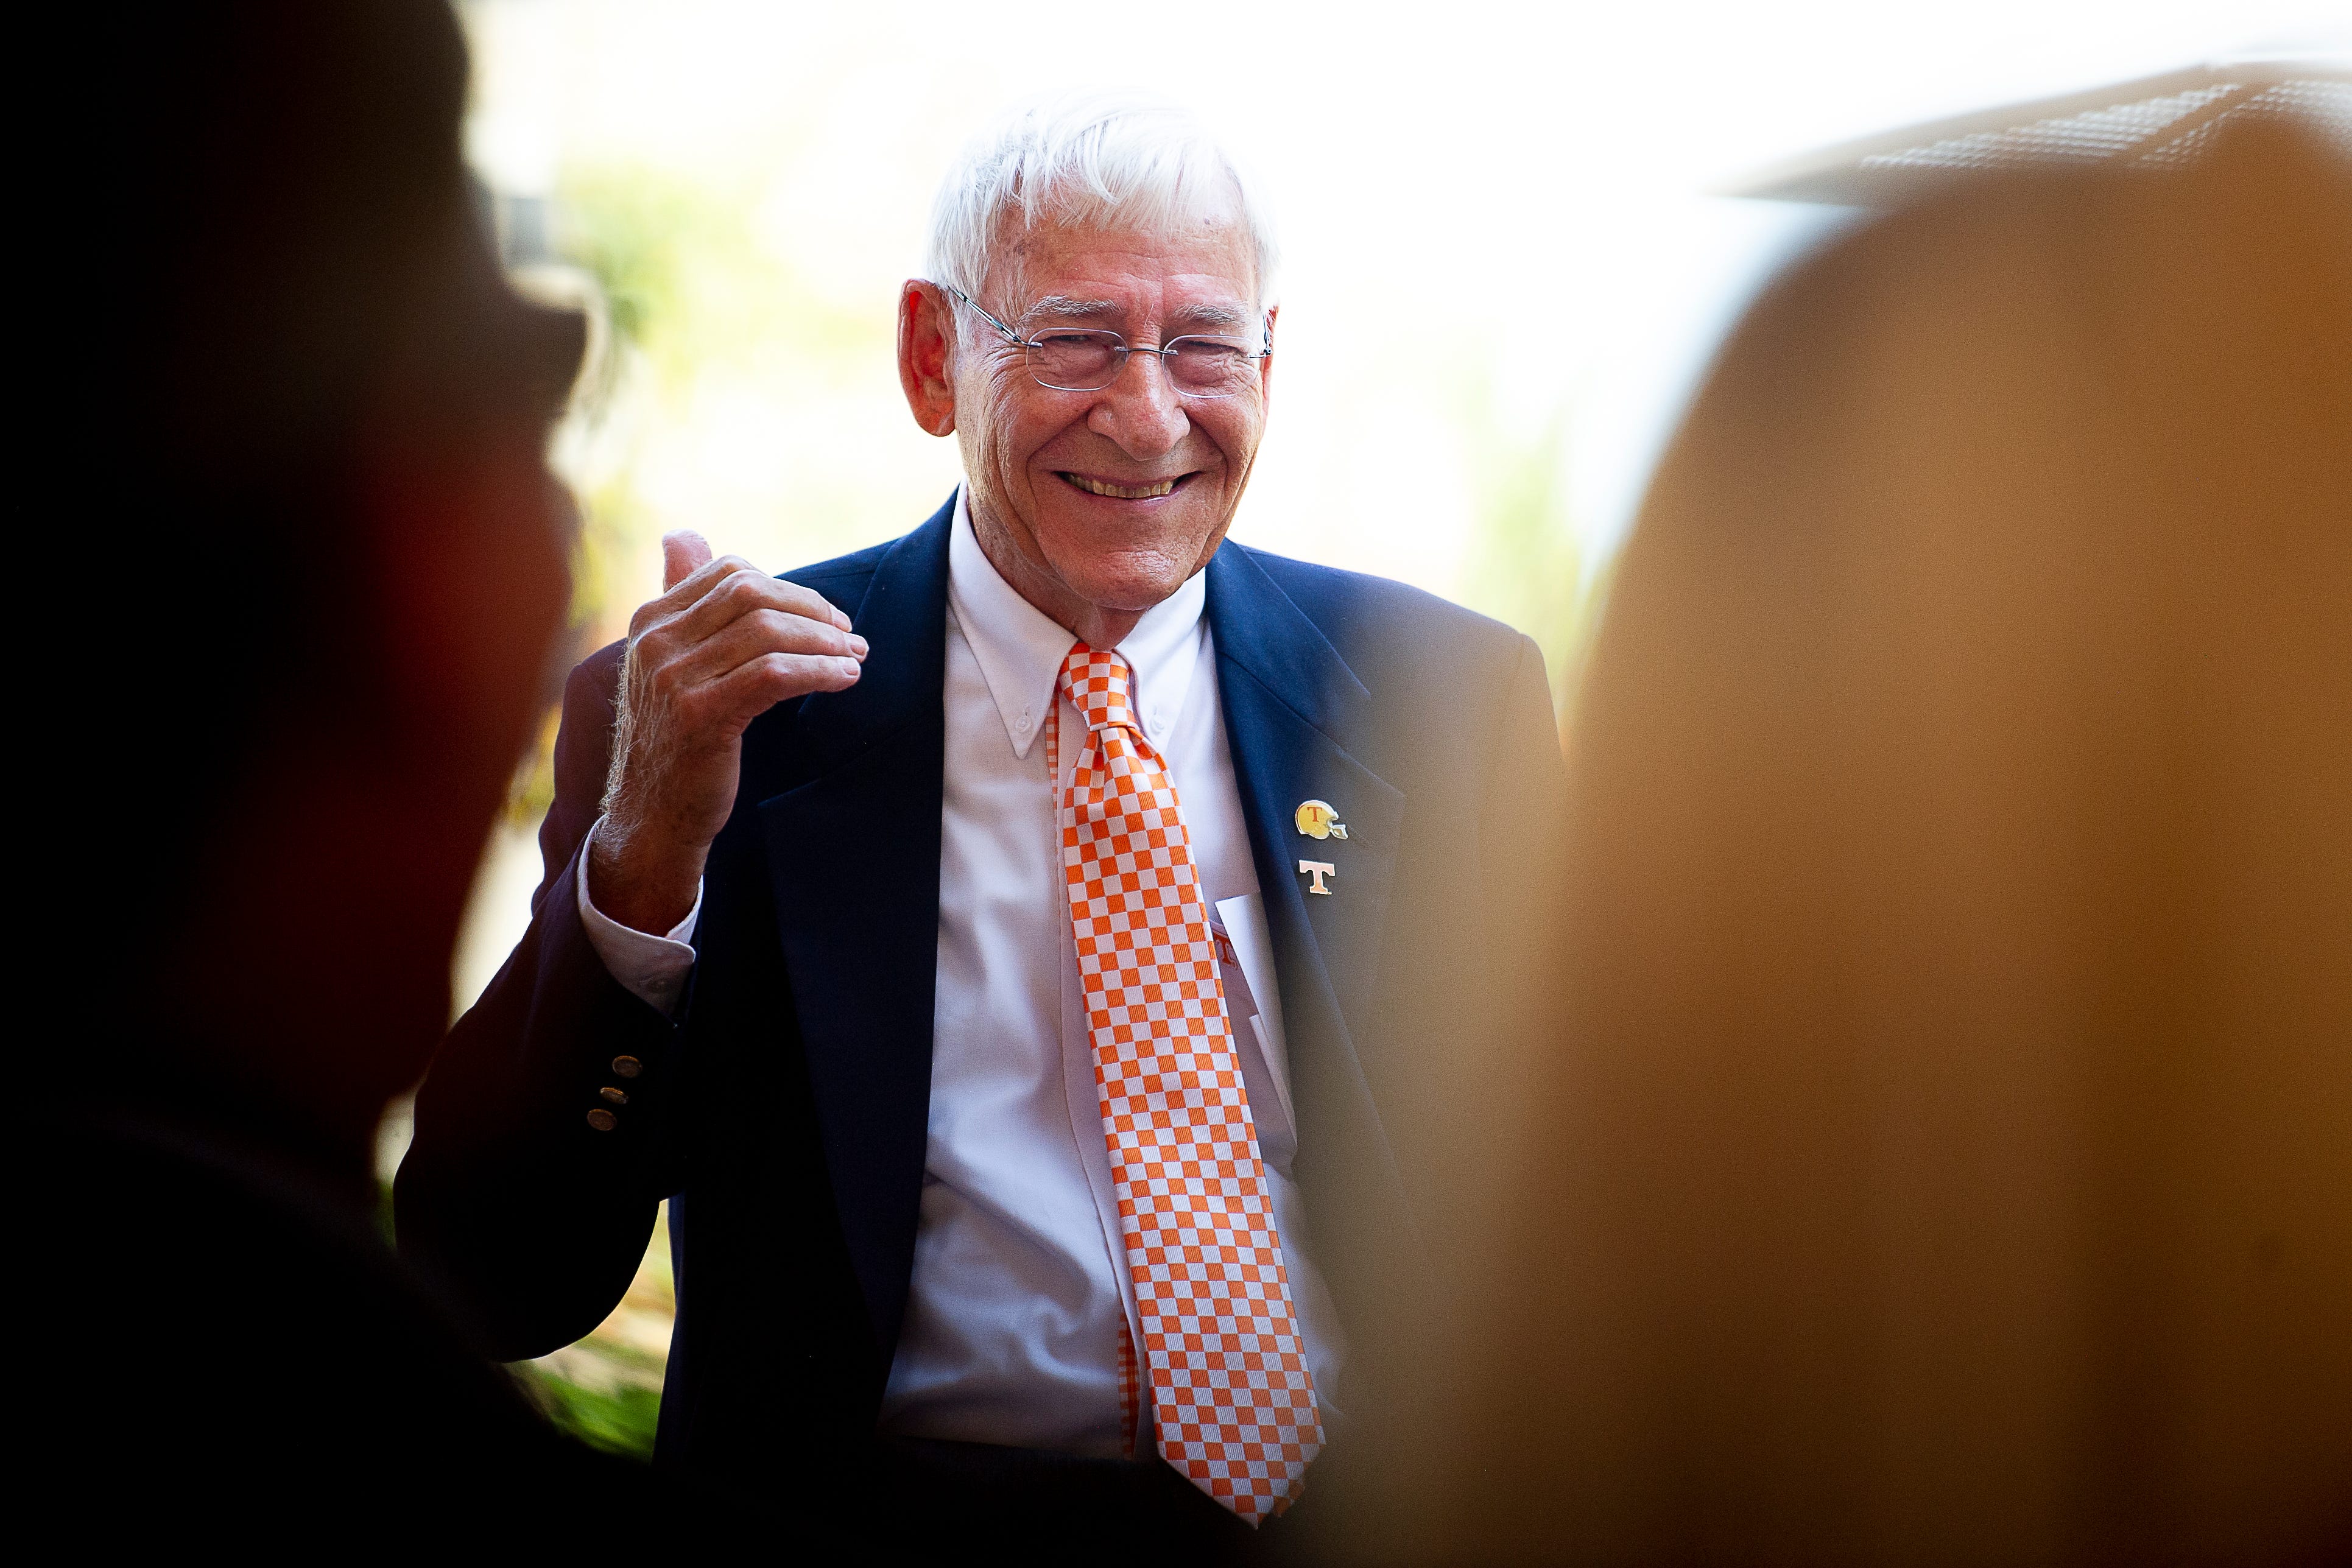 Former Tennessee coach and athletic director Doug Dickey gives a thumbs up during a dedication ceremony of the Doug Dickey Hall of Fame Plaza at the Neyland-Thompson Sports Complex in Knoxville, Tennessee on Friday, October 4, 2019. Dickey led UT to its second SEC title in 1969 and served as the Vols' Director of Athletics from 1986 to 2003.